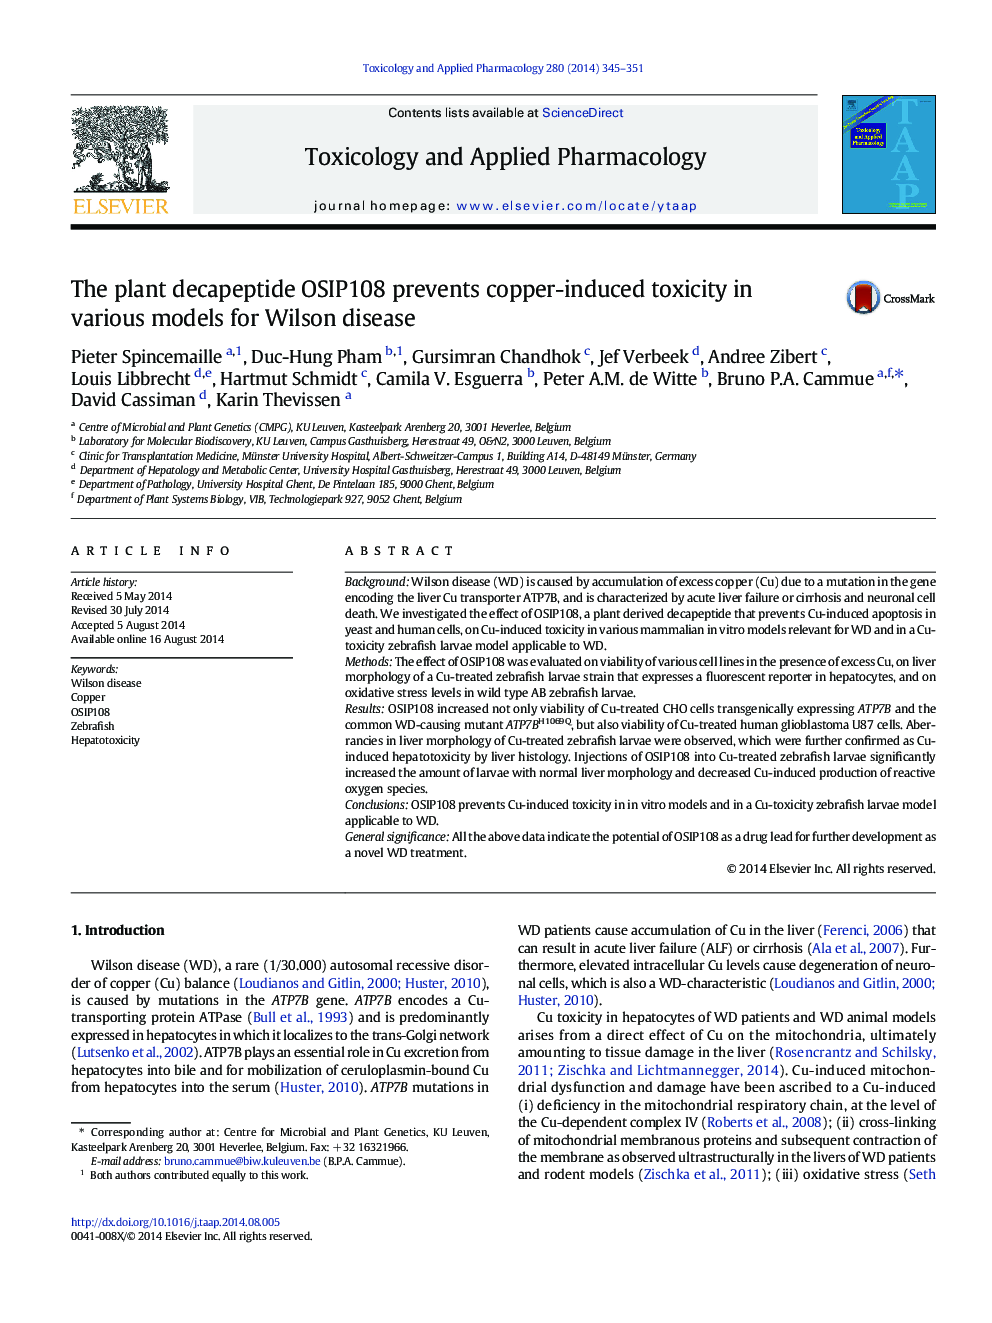 The plant decapeptide OSIP108 prevents copper-induced toxicity in various models for Wilson disease